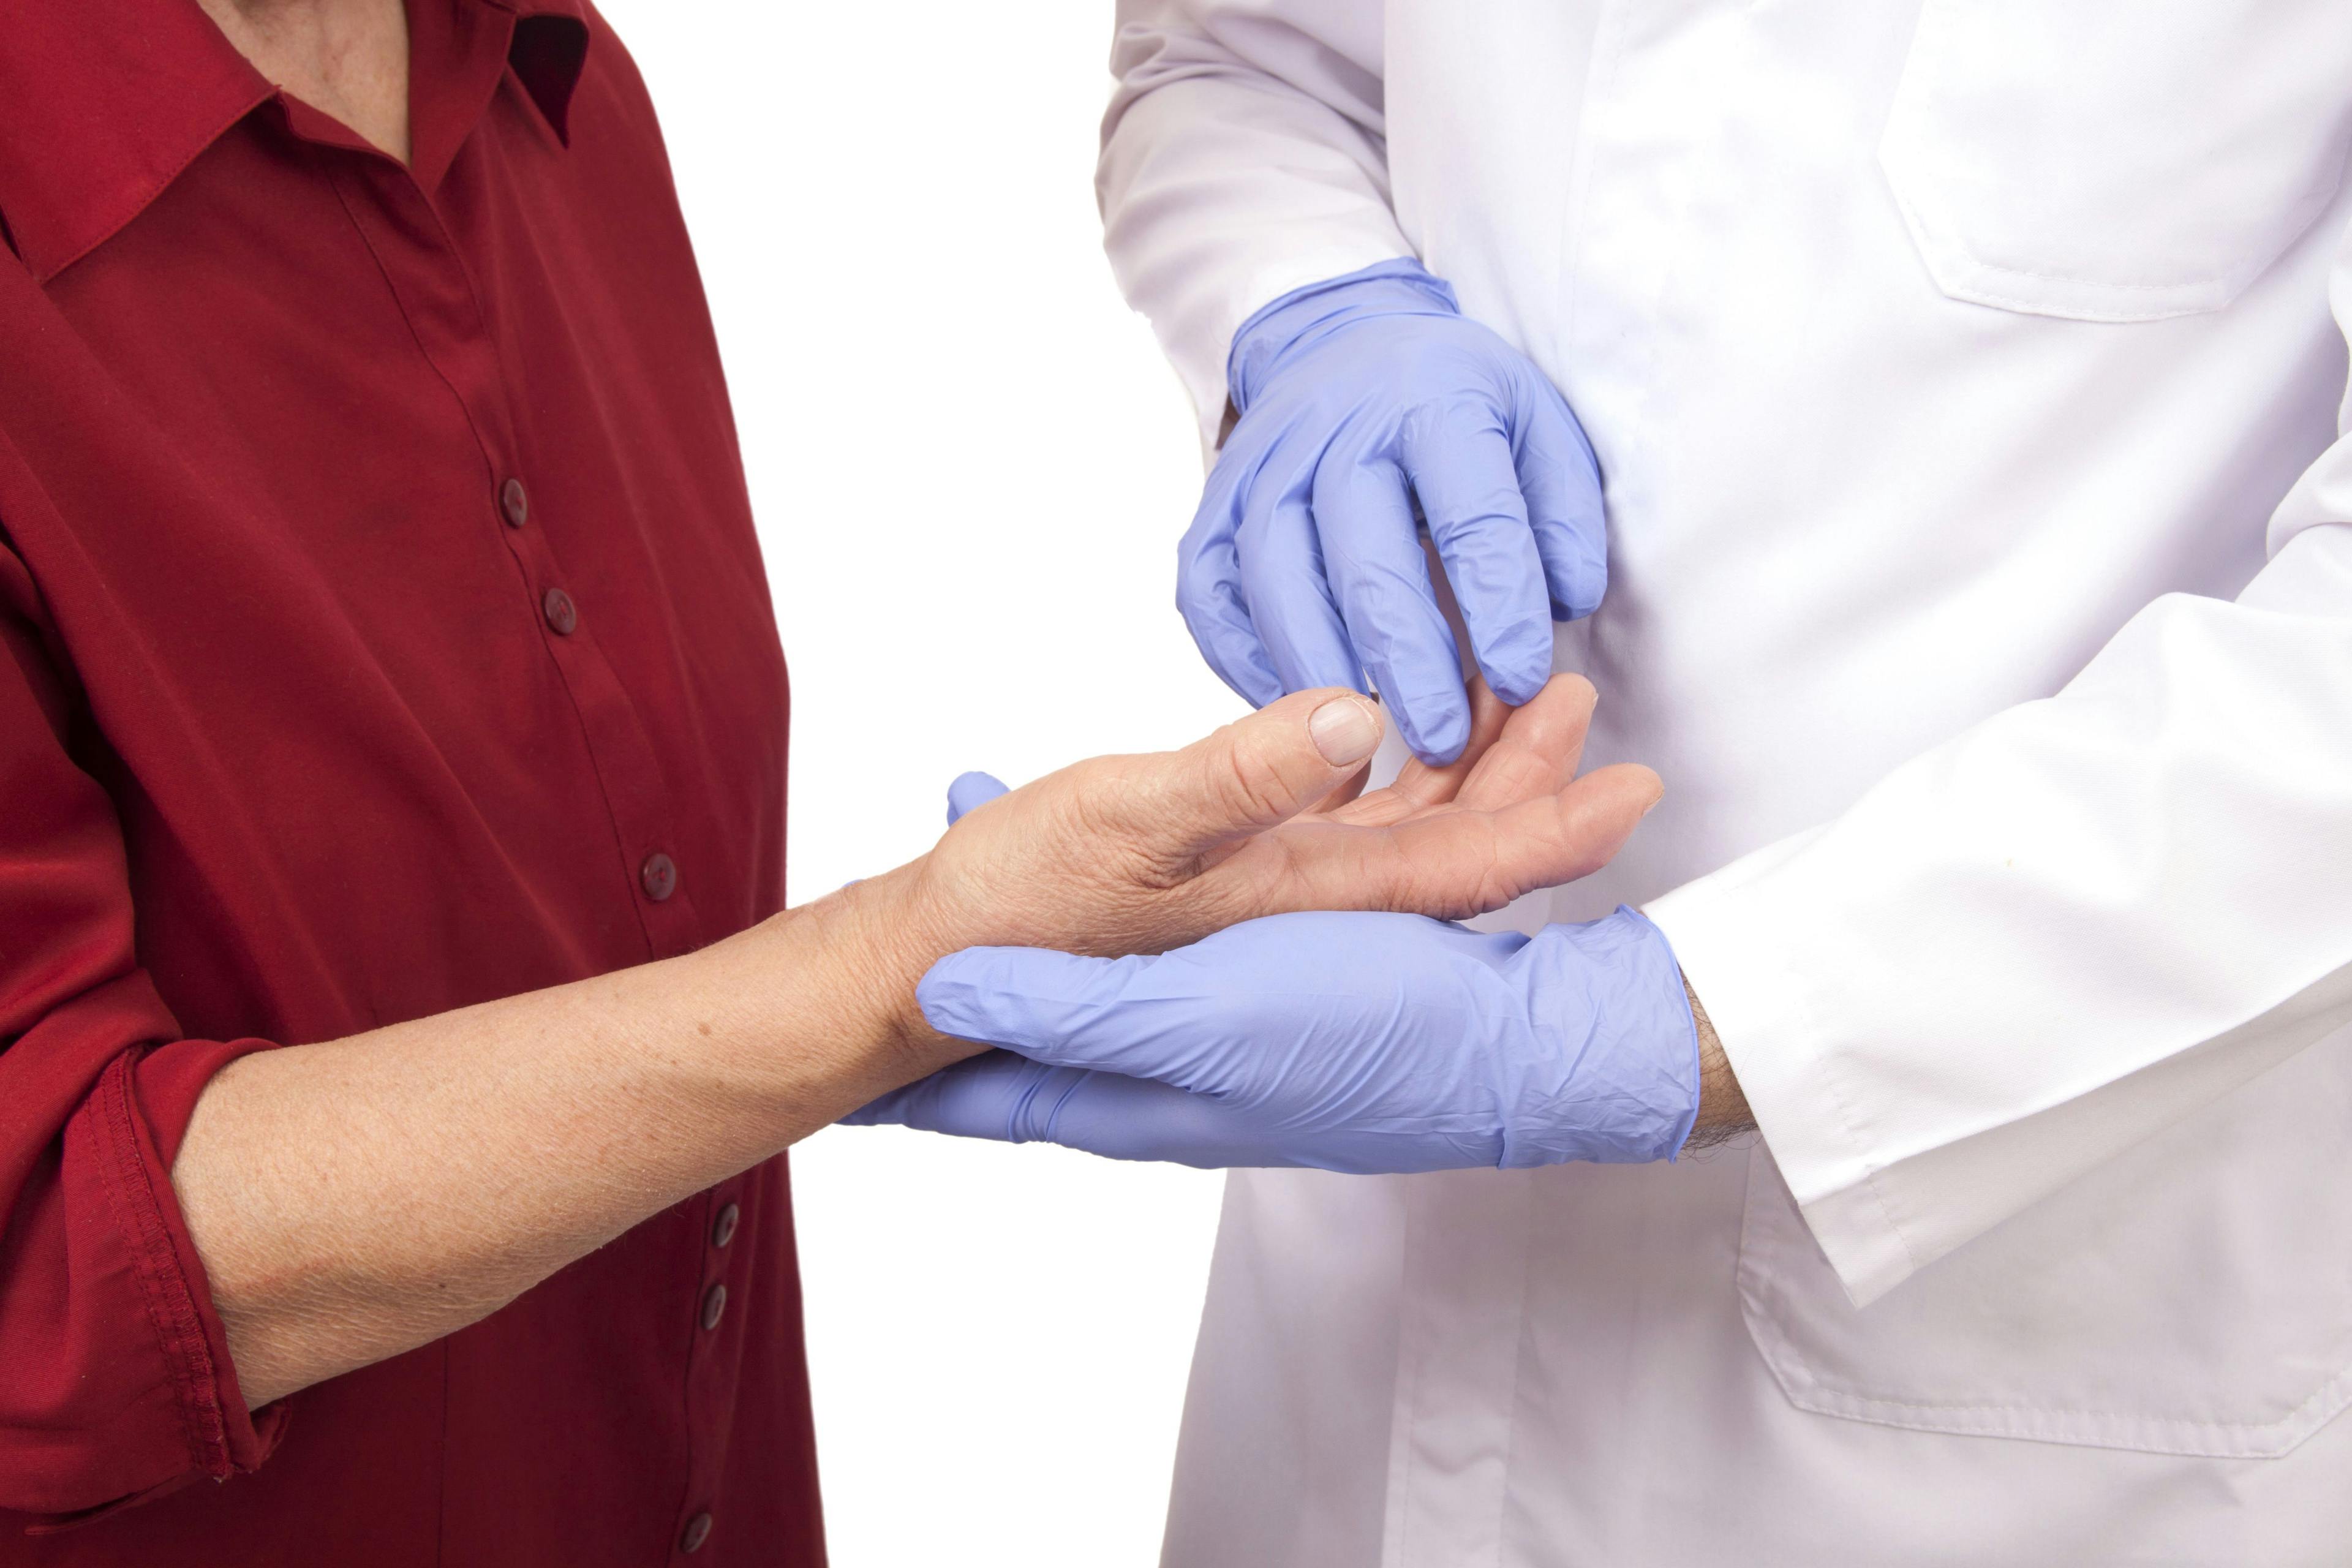 a health professional is examining a woman's hands